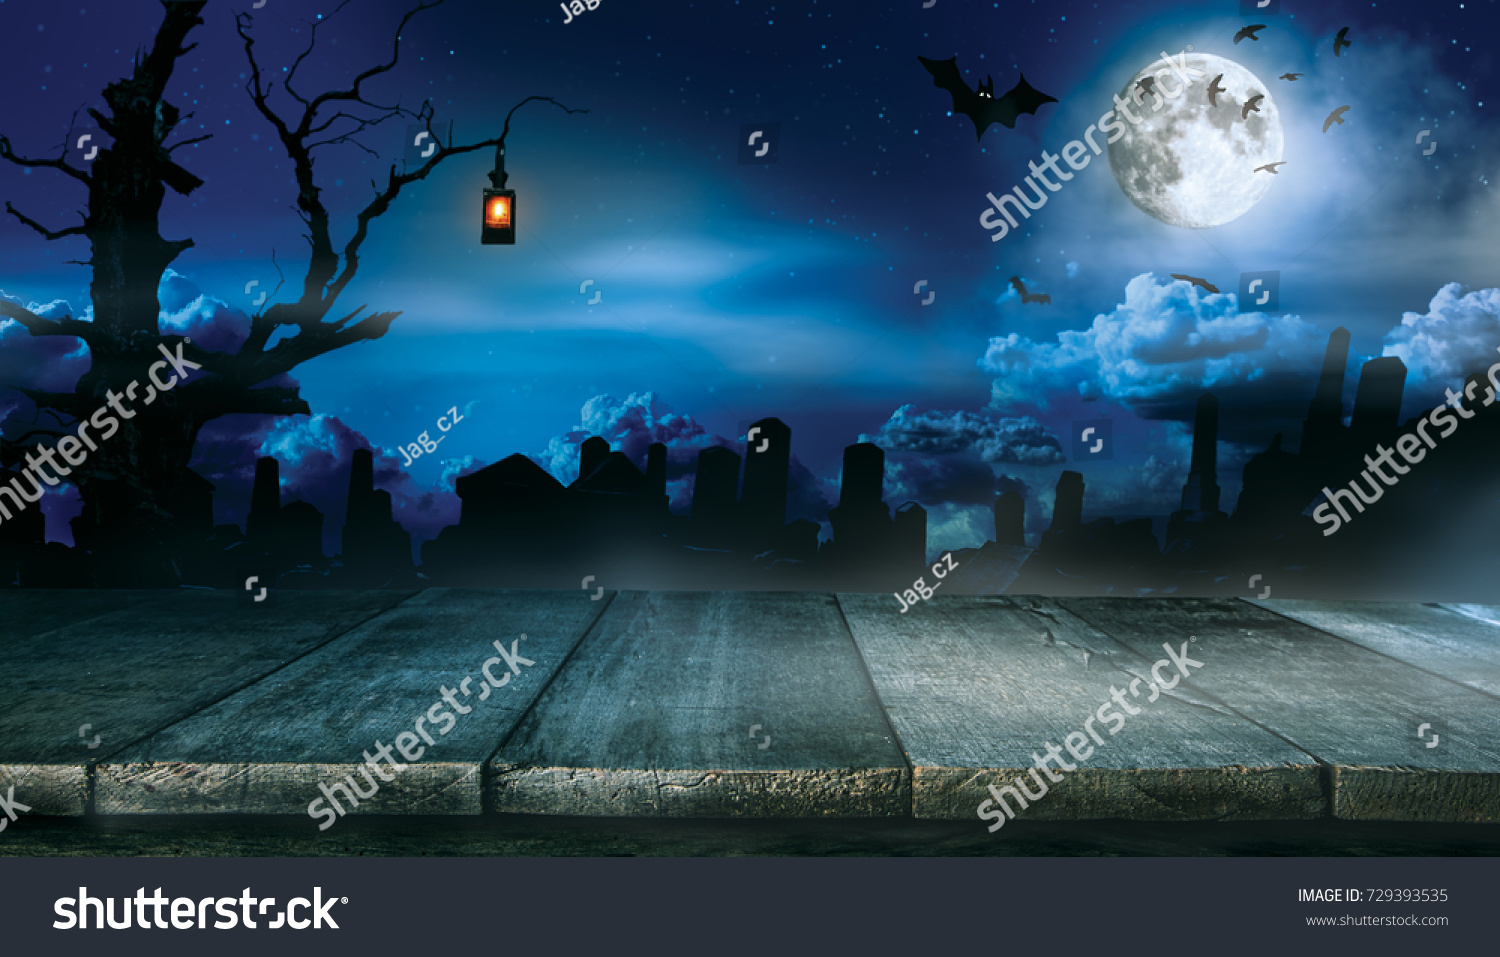 Spooky halloween background with empty wooden planks, dark horror background. Celebration theme, copyspace for text. Ideal for product placement #729393535